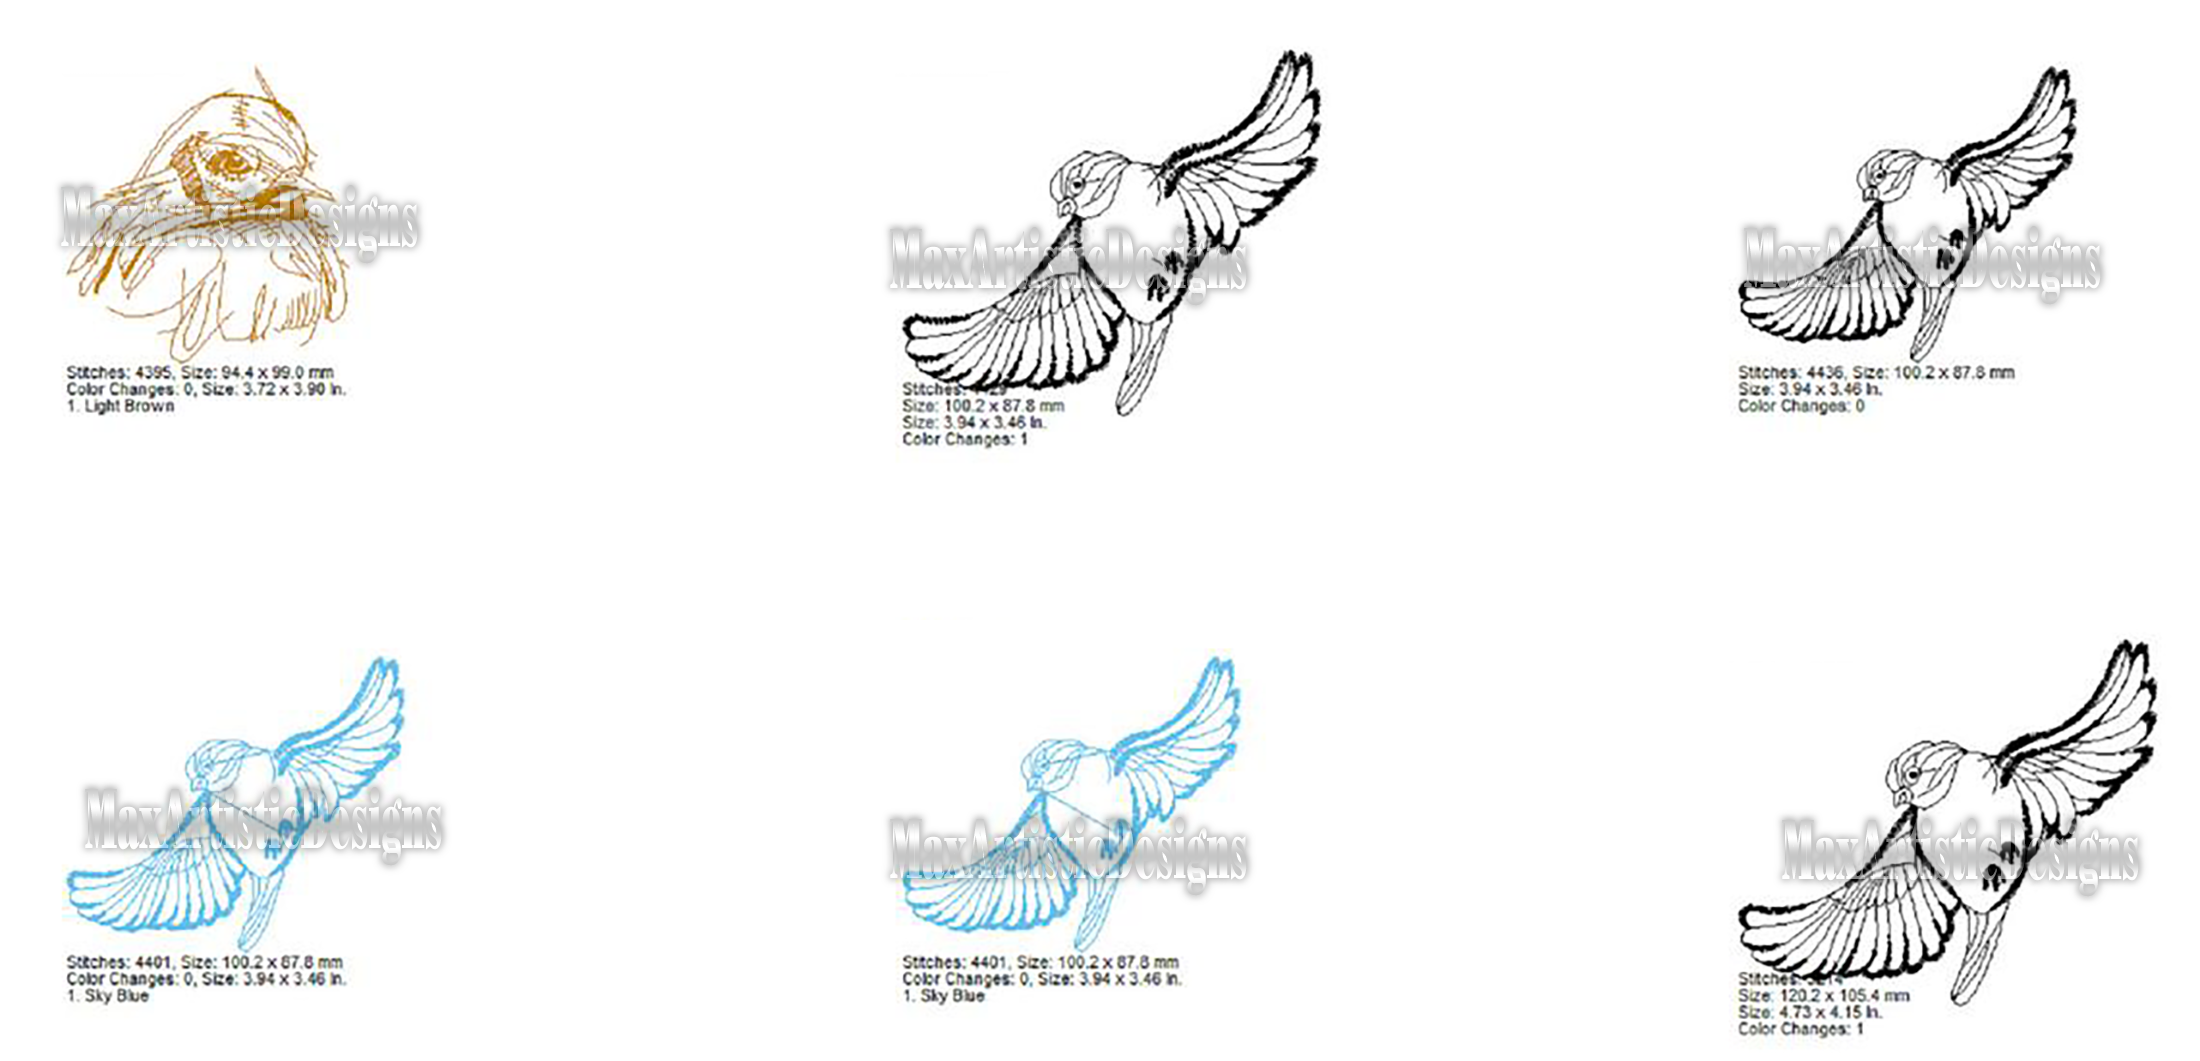 40+ birds embroidery design patterns ready art in pes/hus formats